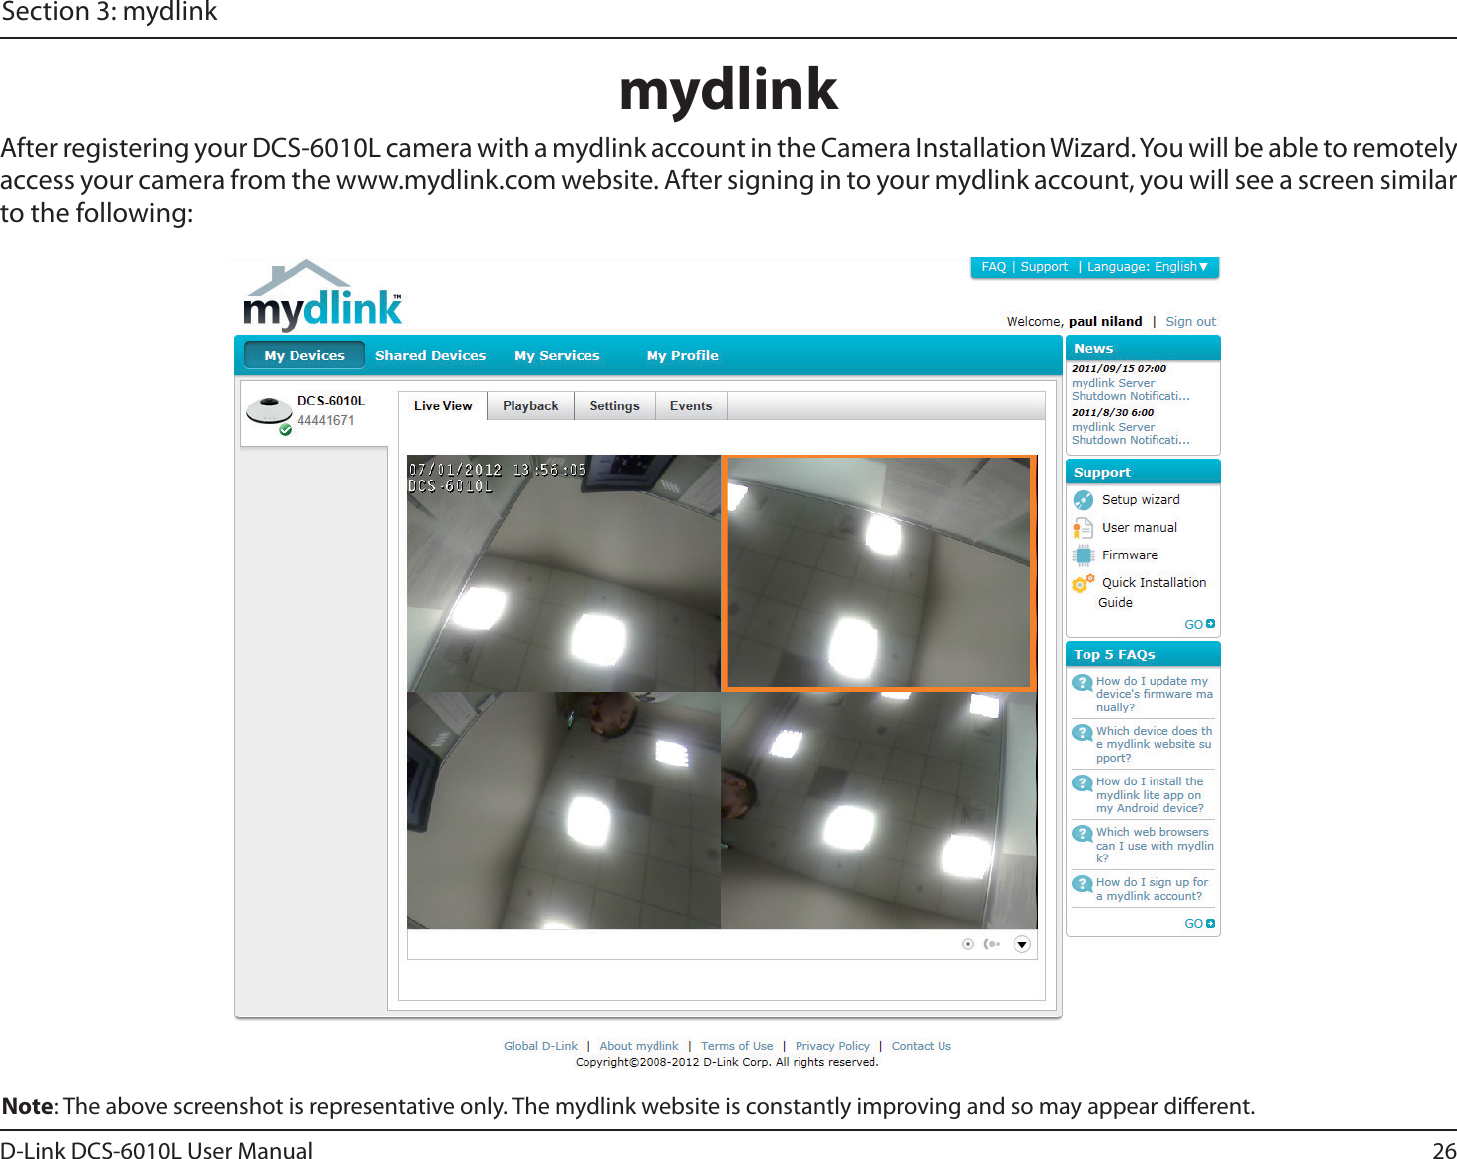 26D-Link DCS-6010L User ManualSection 3: mydlinkmydlinkAfter registering your DCS-6010L camera with a mydlink account in the Camera Installation Wizard. You will be able to remotely access your camera from the www.mydlink.com website. After signing in to your mydlink account, you will see a screen similar to the following:Note: The above screenshot is representative only. The mydlink website is constantly improving and so may appear dierent.